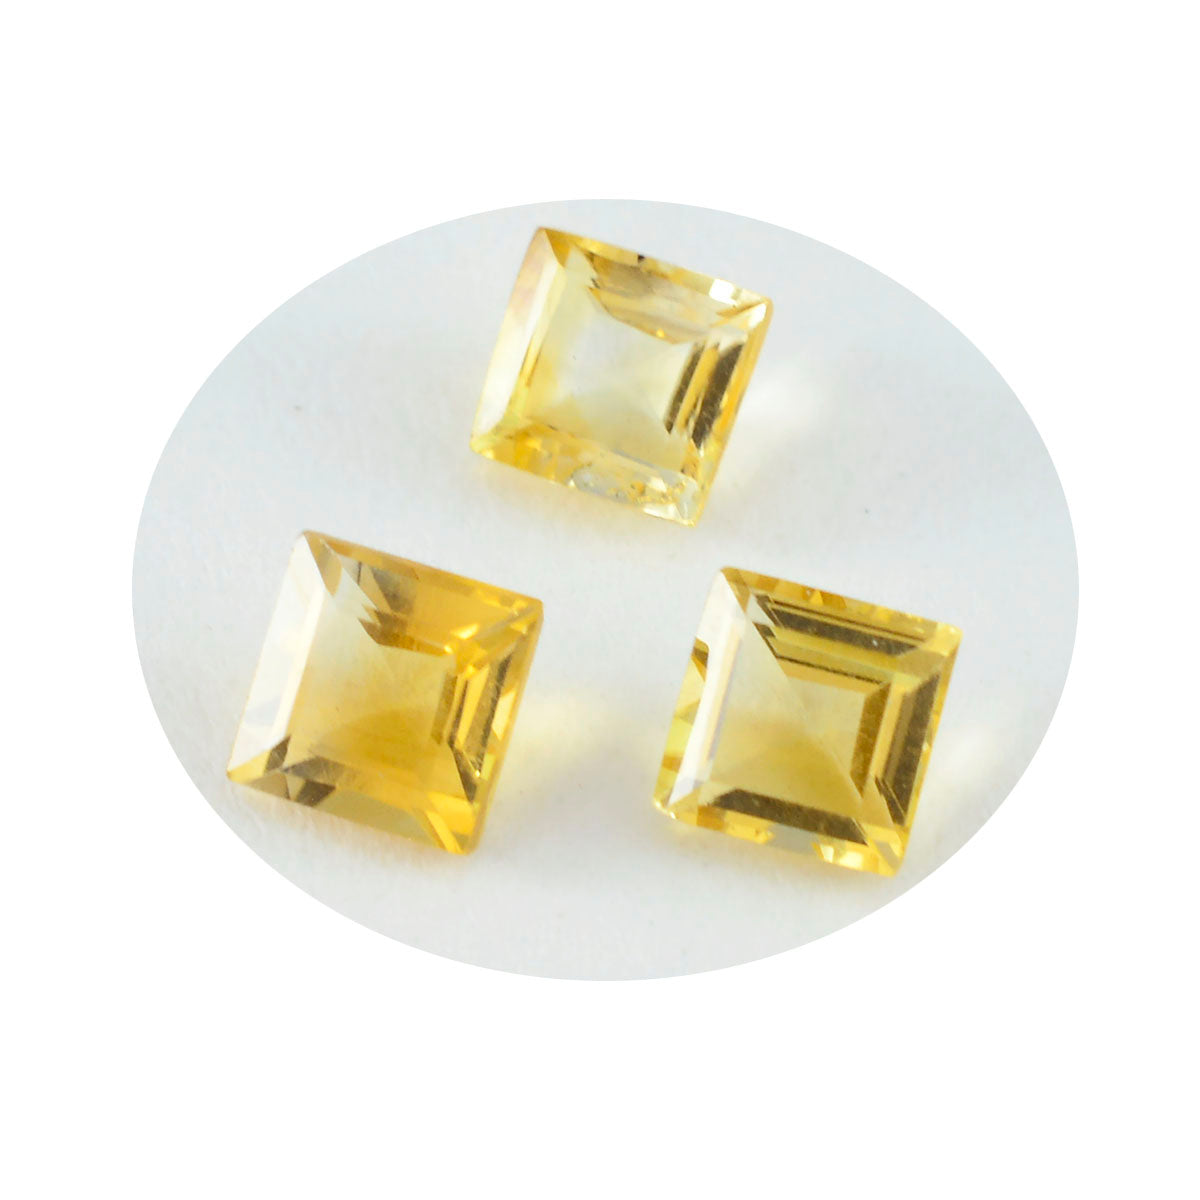 Riyogems 1PC Genuine Yellow Citrine Faceted 8x8 mm Square Shape handsome Quality Loose Gems